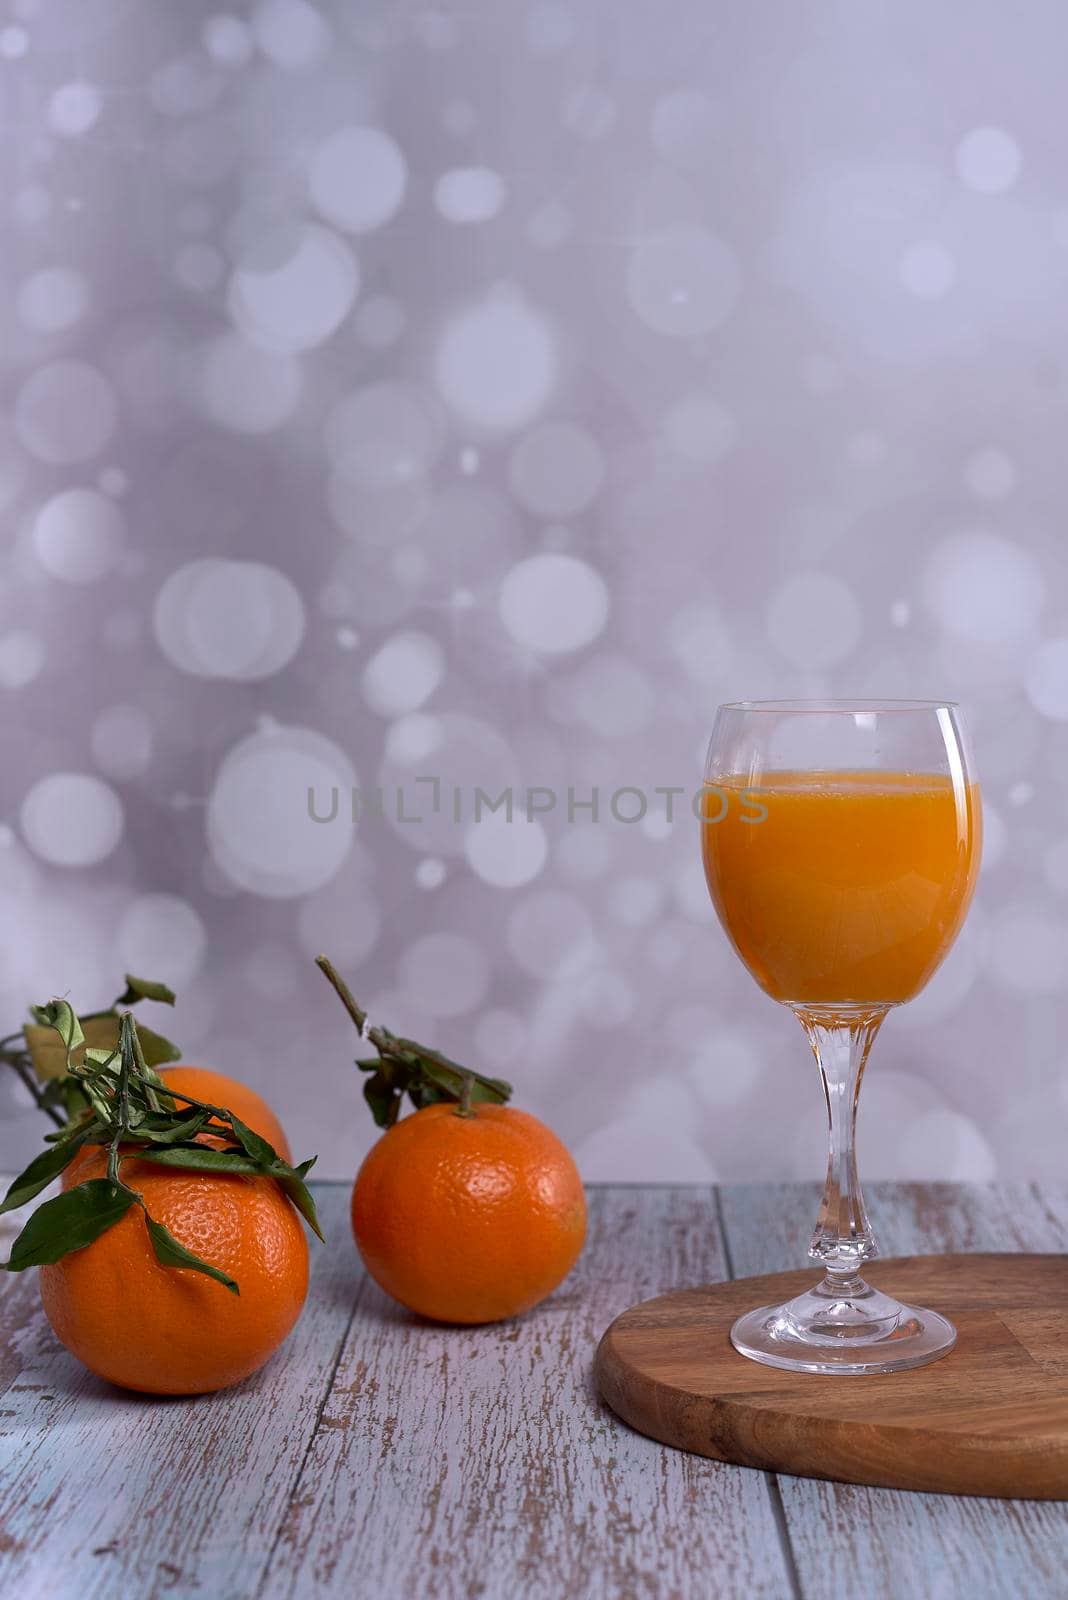 Glass of orange juice. wooden table whole oranges with green leaves bright background